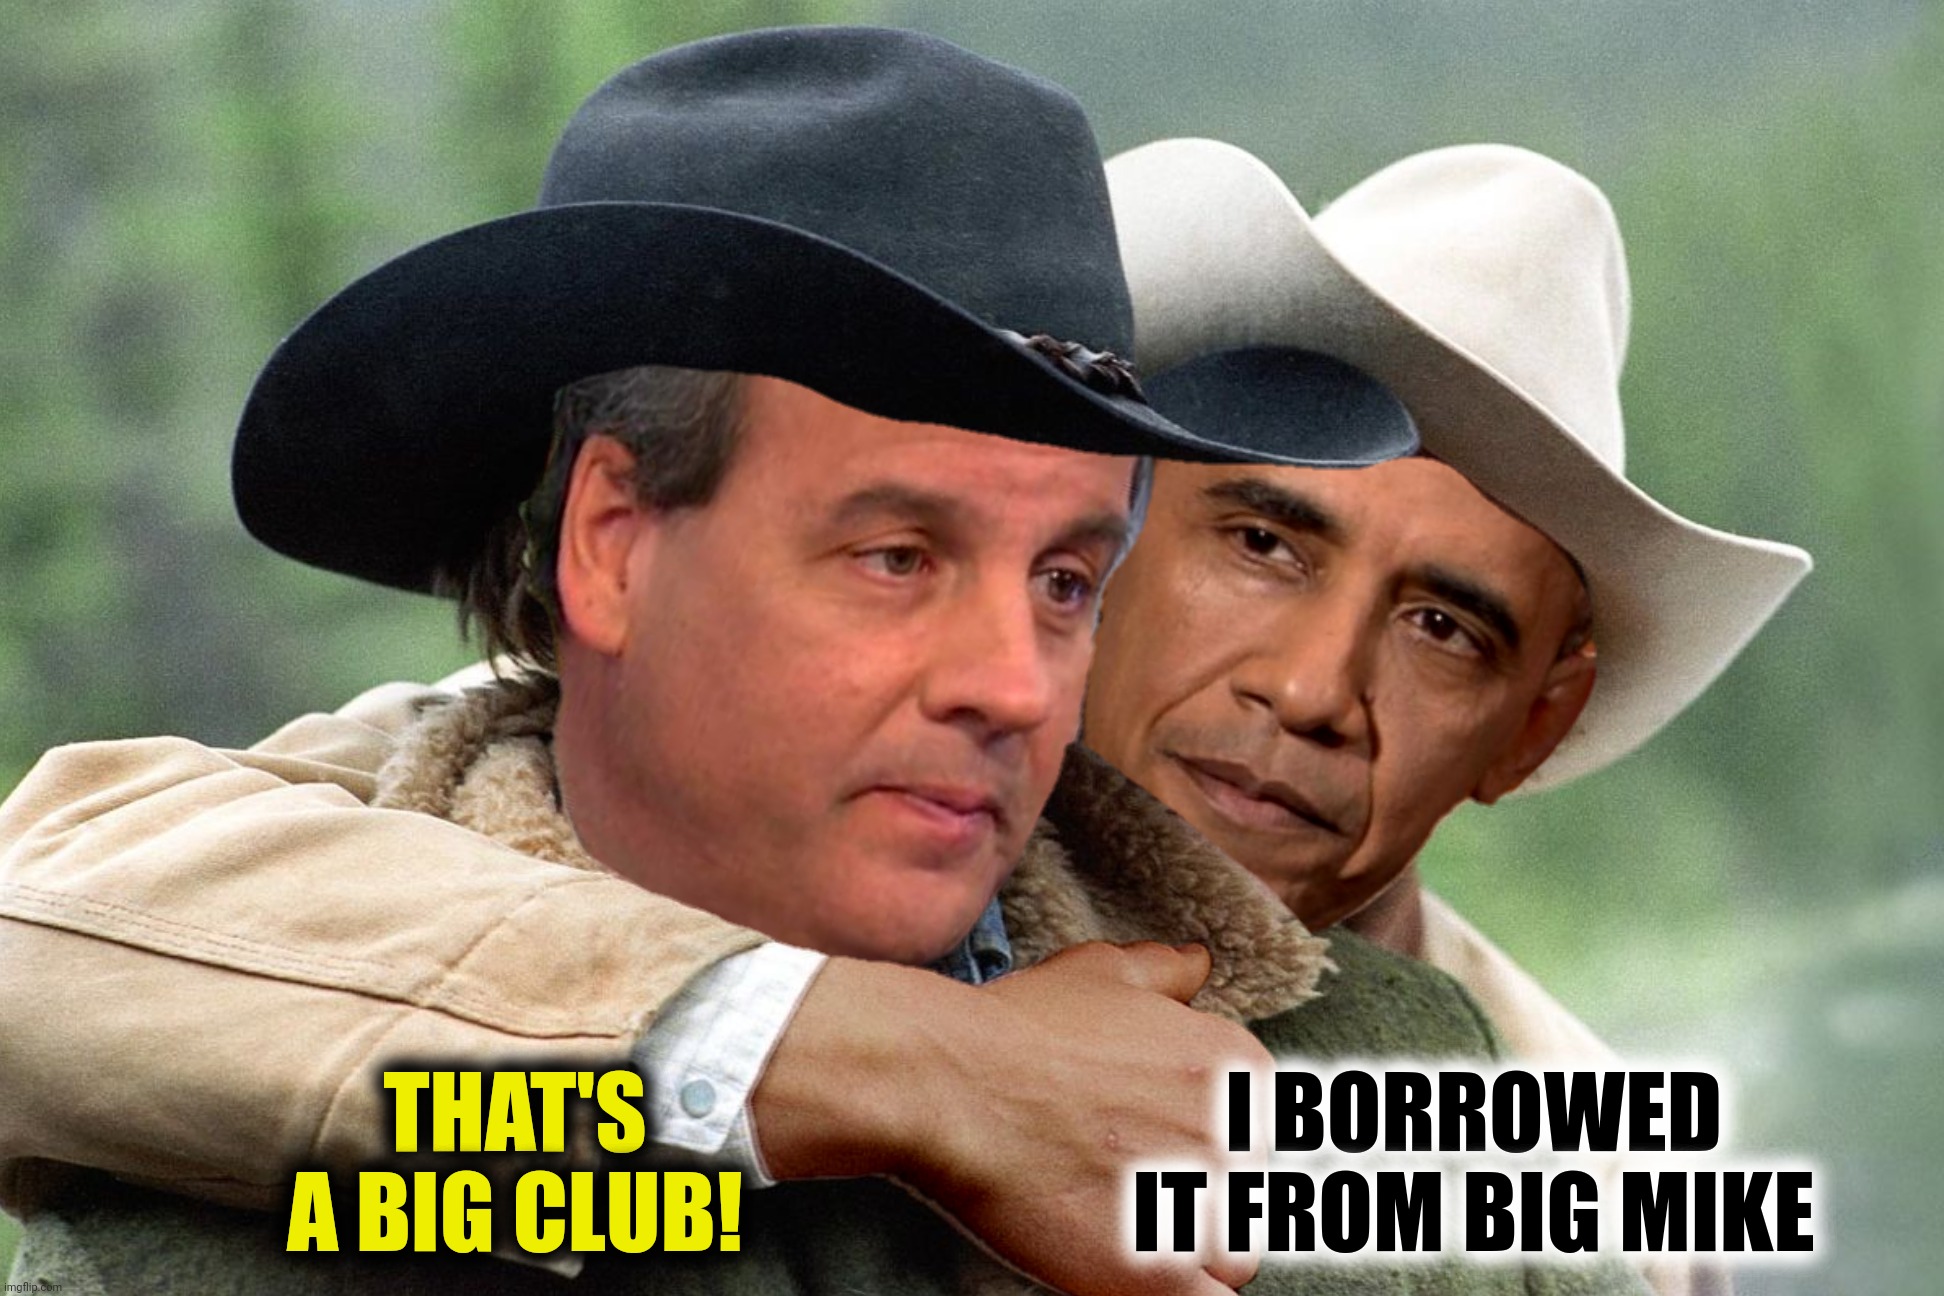 THAT'S A BIG CLUB! I BORROWED IT FROM BIG MIKE | made w/ Imgflip meme maker